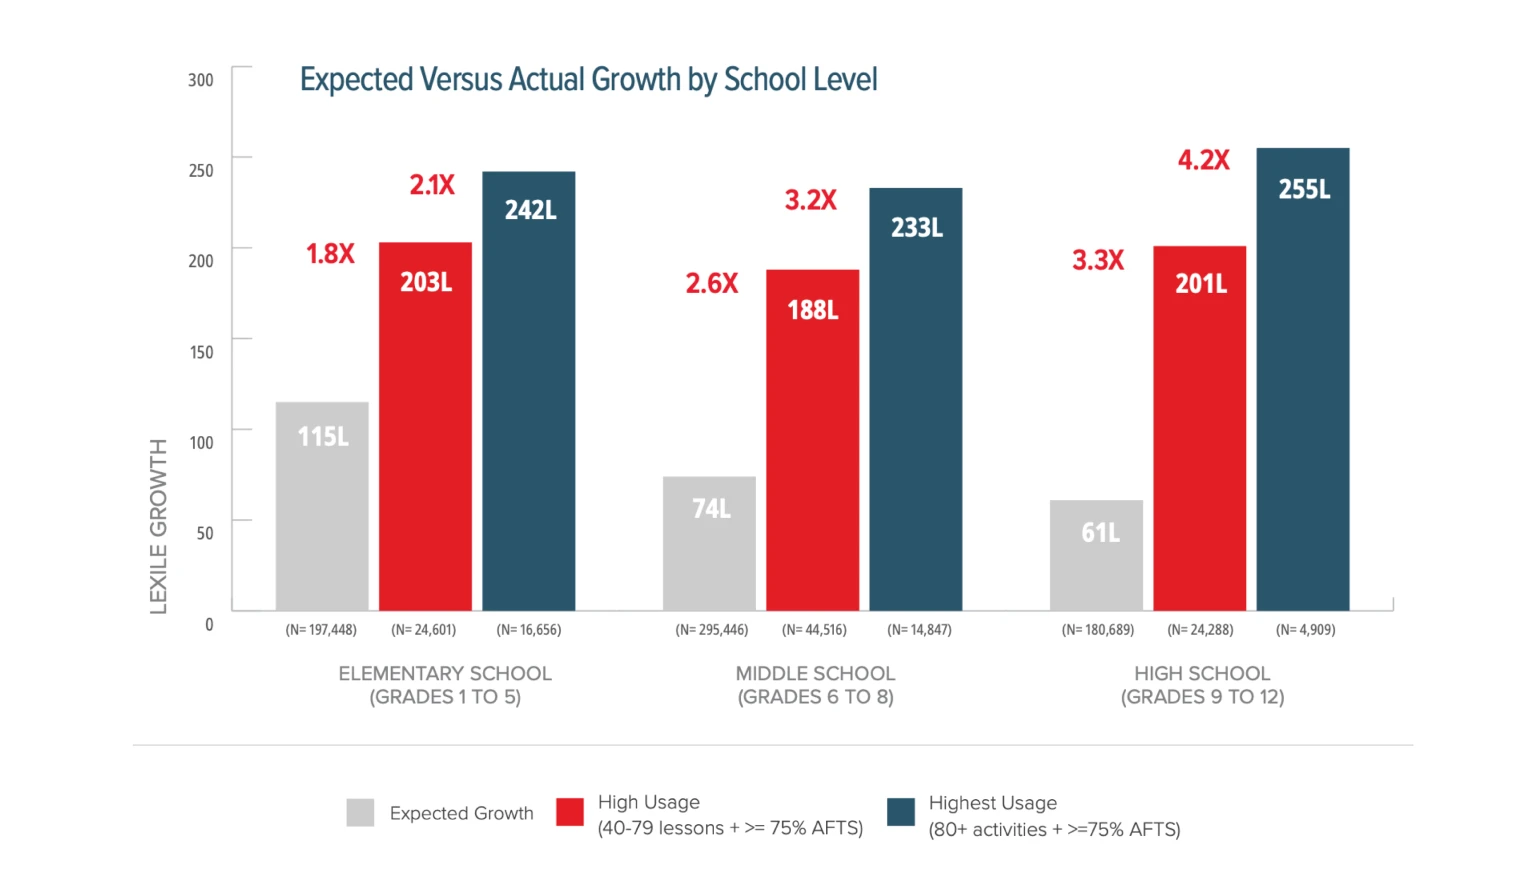 A graph called “Expected Versus Actual Growth by School Level” showing lexile growth on a range between 0 and 300. For elementary school (grades 1 to 5), expected growth is at 115, high usage of Achieve3000 Literacy (40-79 lessons) is at 203 (1.8 times more than expected growth) and highest usage of Achieve3000 Literacy(80+ activities) is at 242 (2.1 times more than expected growth). For middle school (grades 6 to 8), expected growth is at 74, high usage of Achieve3000 Literacy (40-79 lessons) is at 188 (2.6 times more than expected growth) and highest usage of Achieve3000 Literacy (80+ activities) is at 233 (3.2 times more than expected growth). For high school (grades 9 to 12), expected growth is at 61, high usage of Achieve3000 (40-79 lessons) is at 201 (3.1 times more than expected growth) and highest usage (80+ activities) is at 255 (4.2 times more than expected growth). 